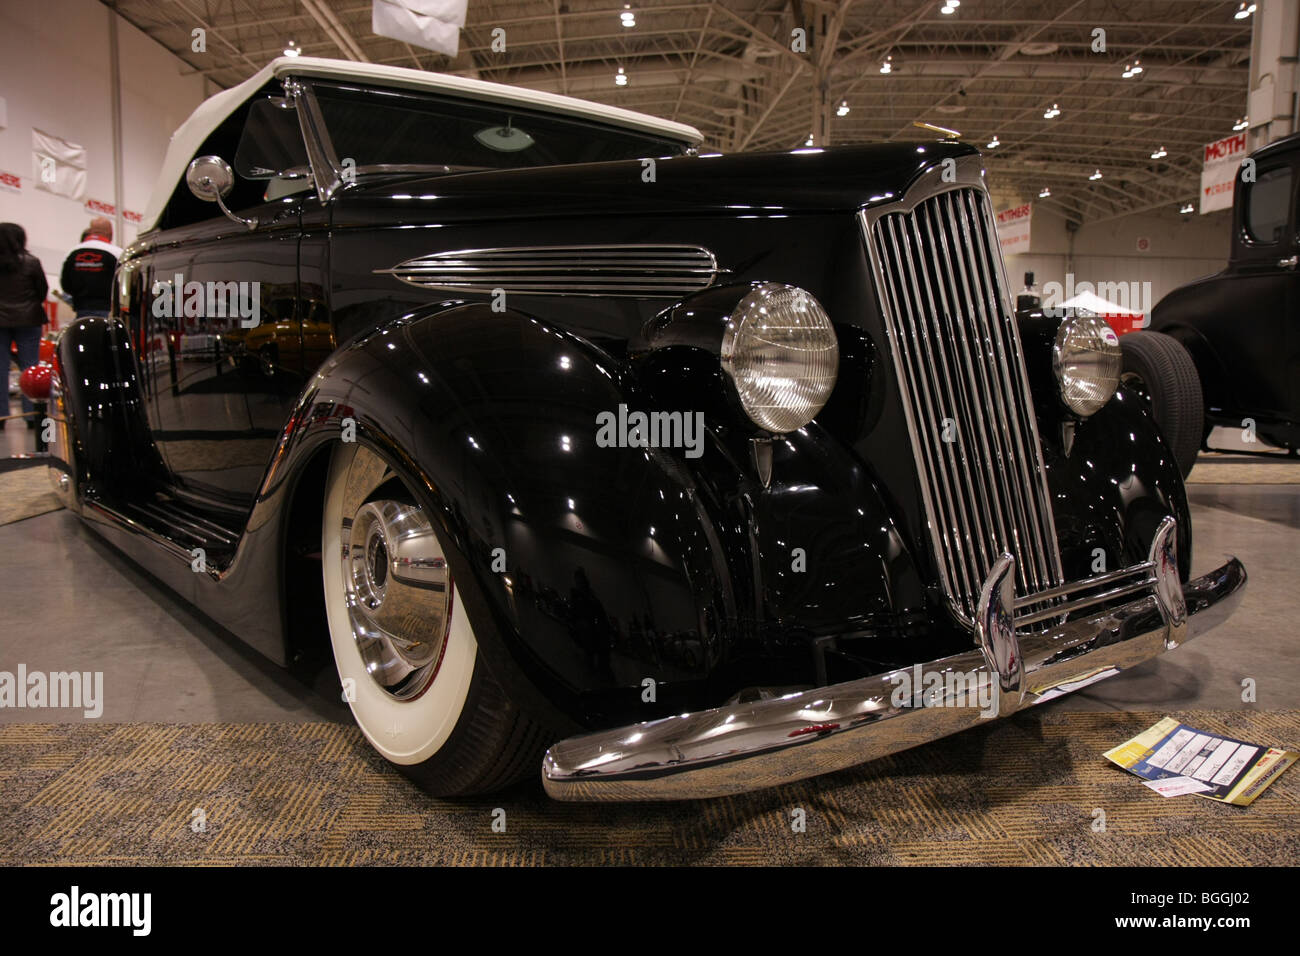 Custom vintage classic luxury black American retro cars on display at a car local indoor car show Stock Photo